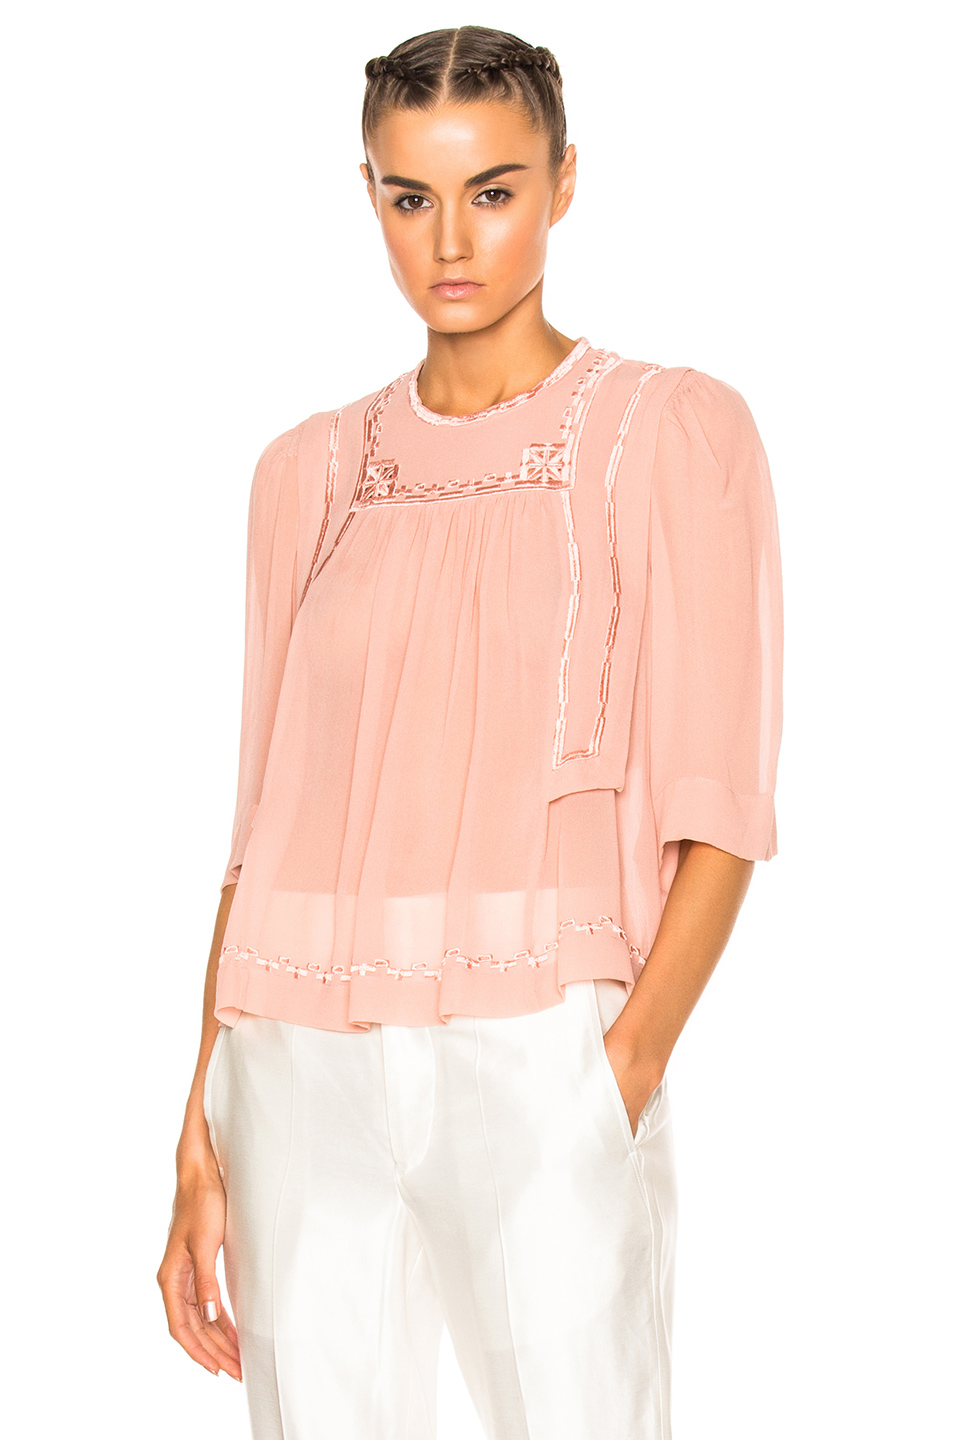 2 Stores In Stock: ISABEL MARANT Mara Blouse, Pink | ModeSens